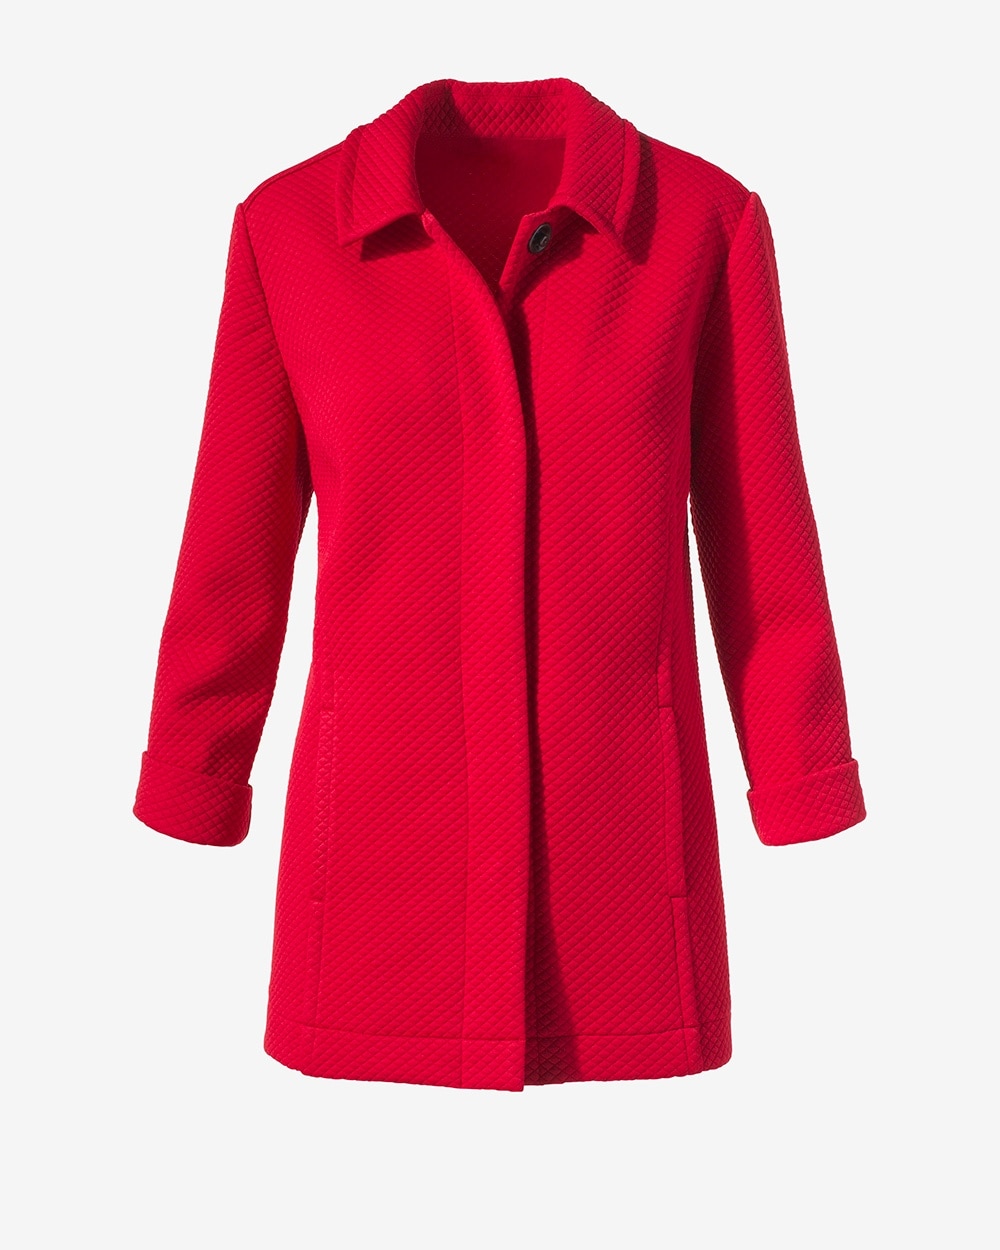 Textured Jacquard Red Jacket